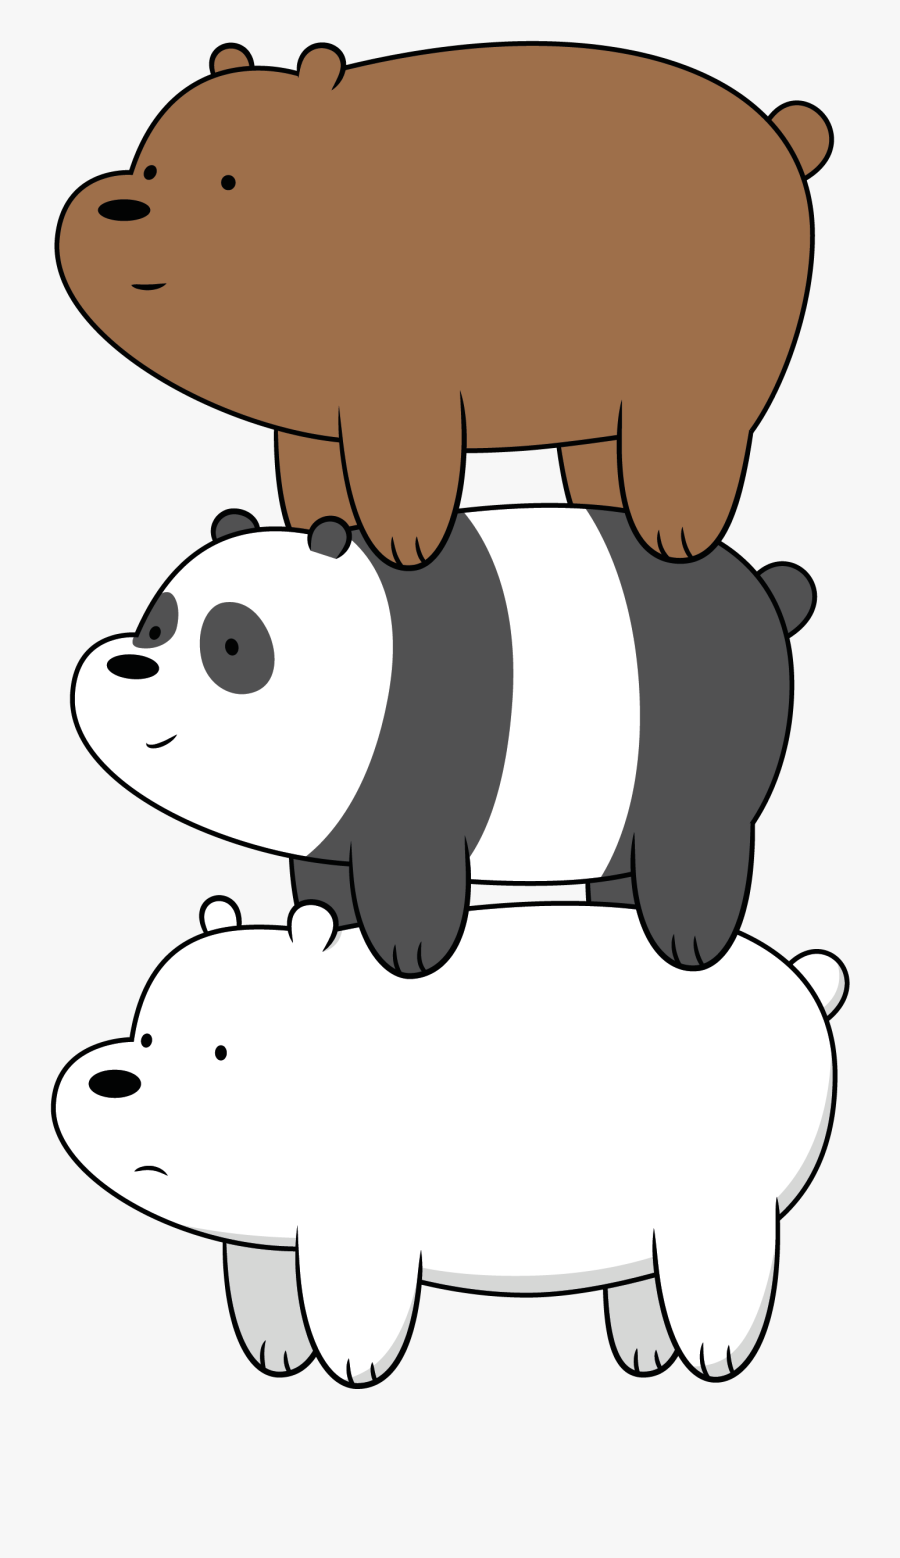 The Three Bears - We Bare Bears Vector, Transparent Clipart